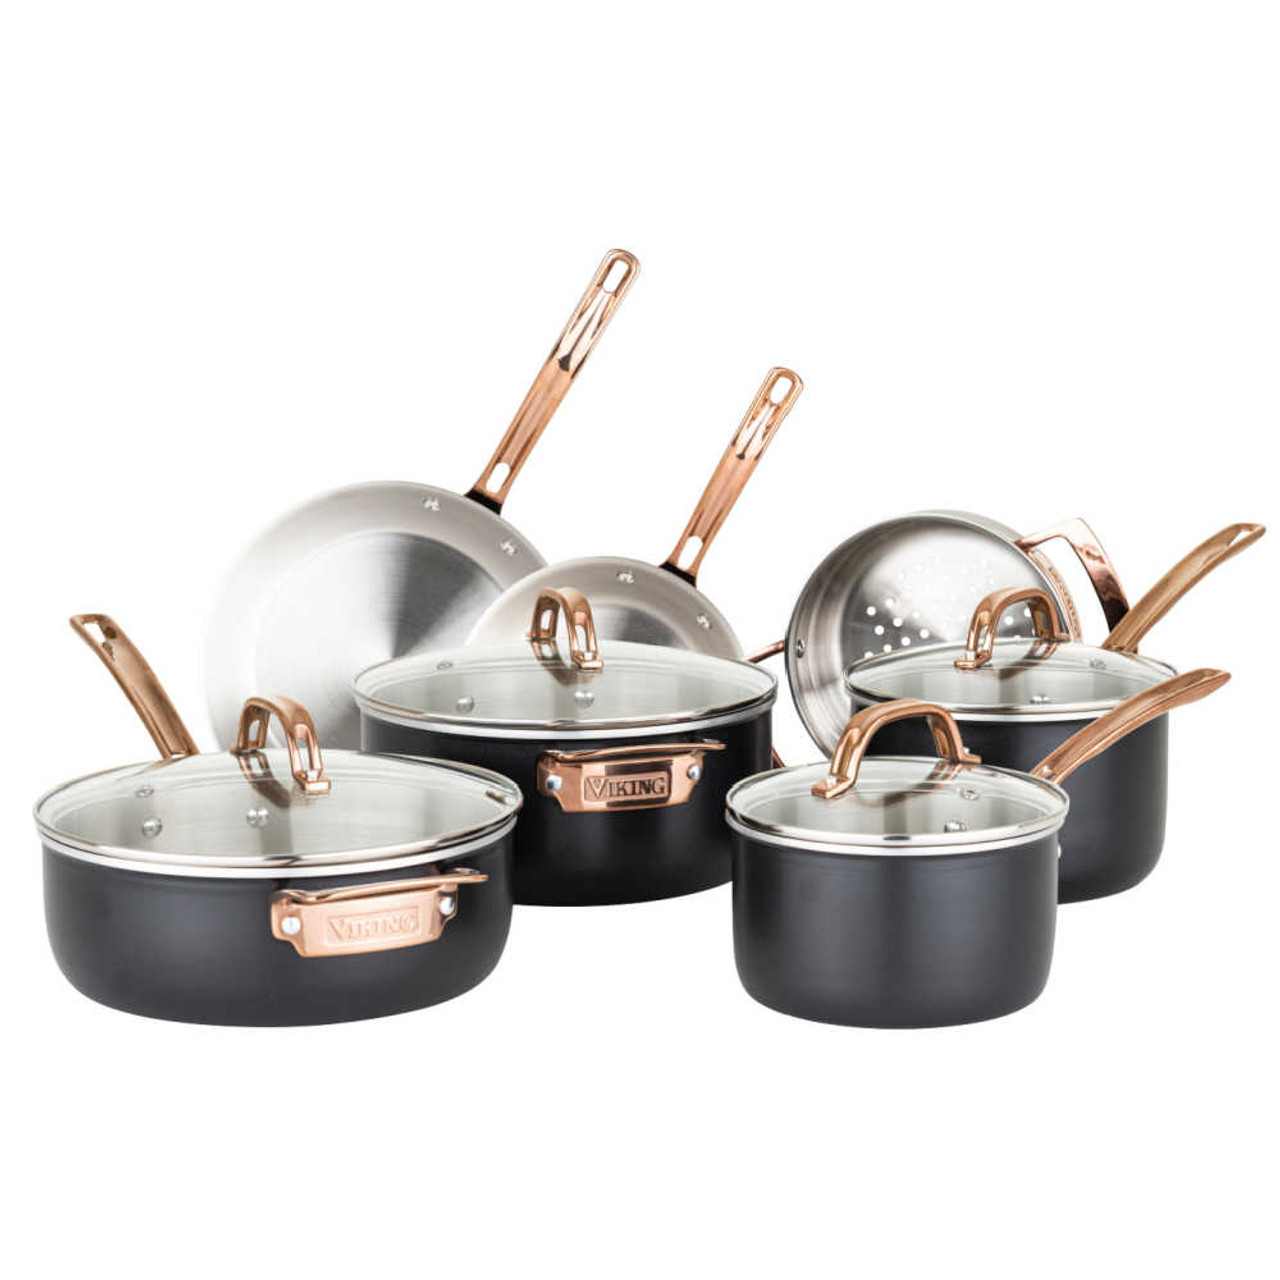 Viking Hammered Copper Clad 10 Piece Cookware Set & Reviews